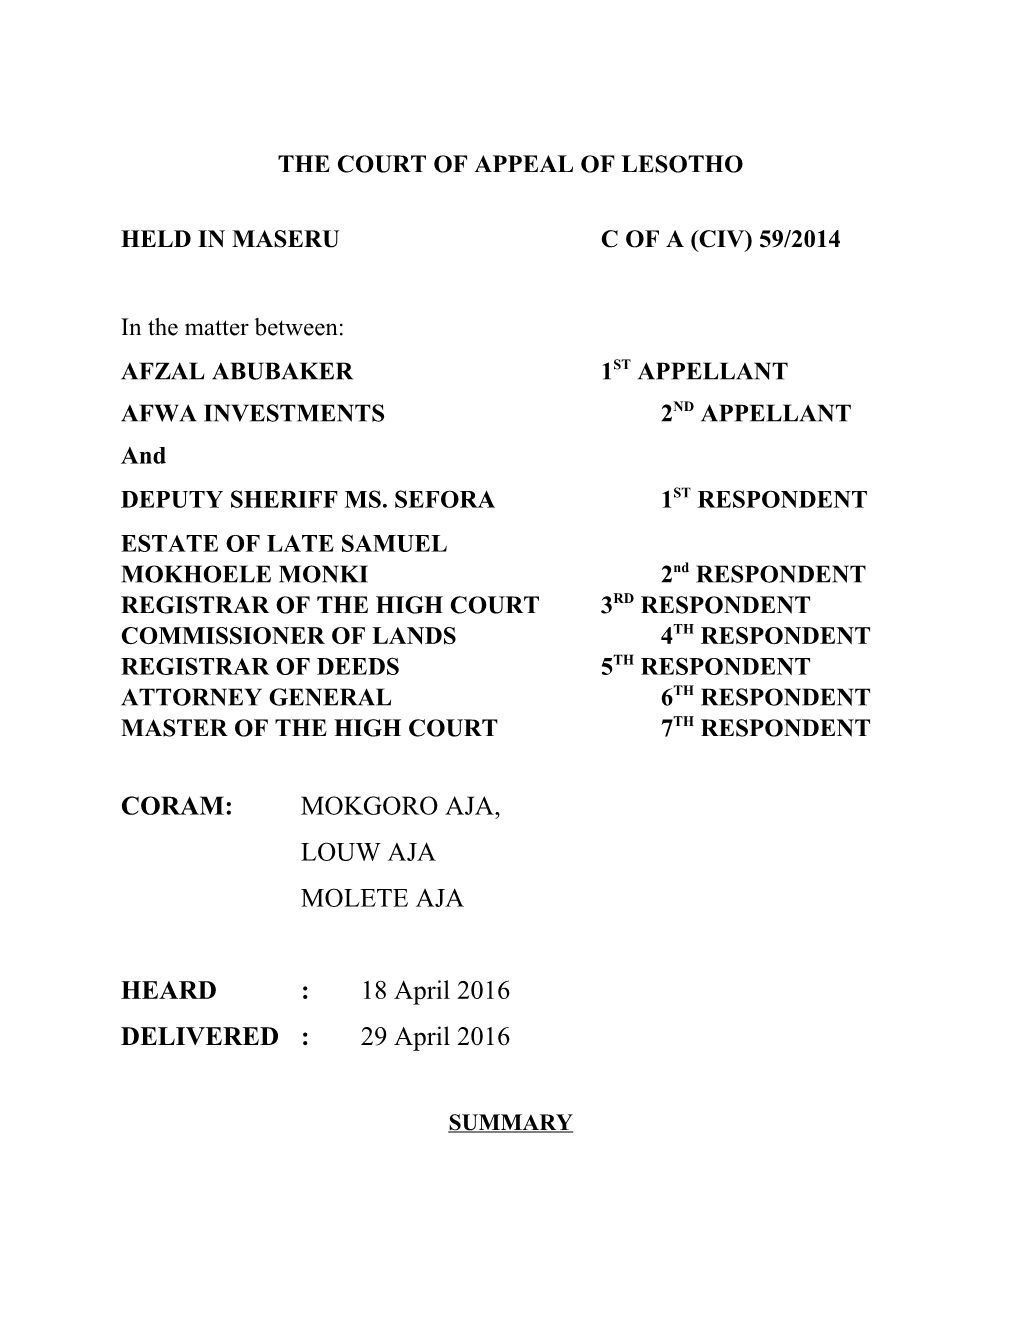 The Court of Appeal of Lesotho